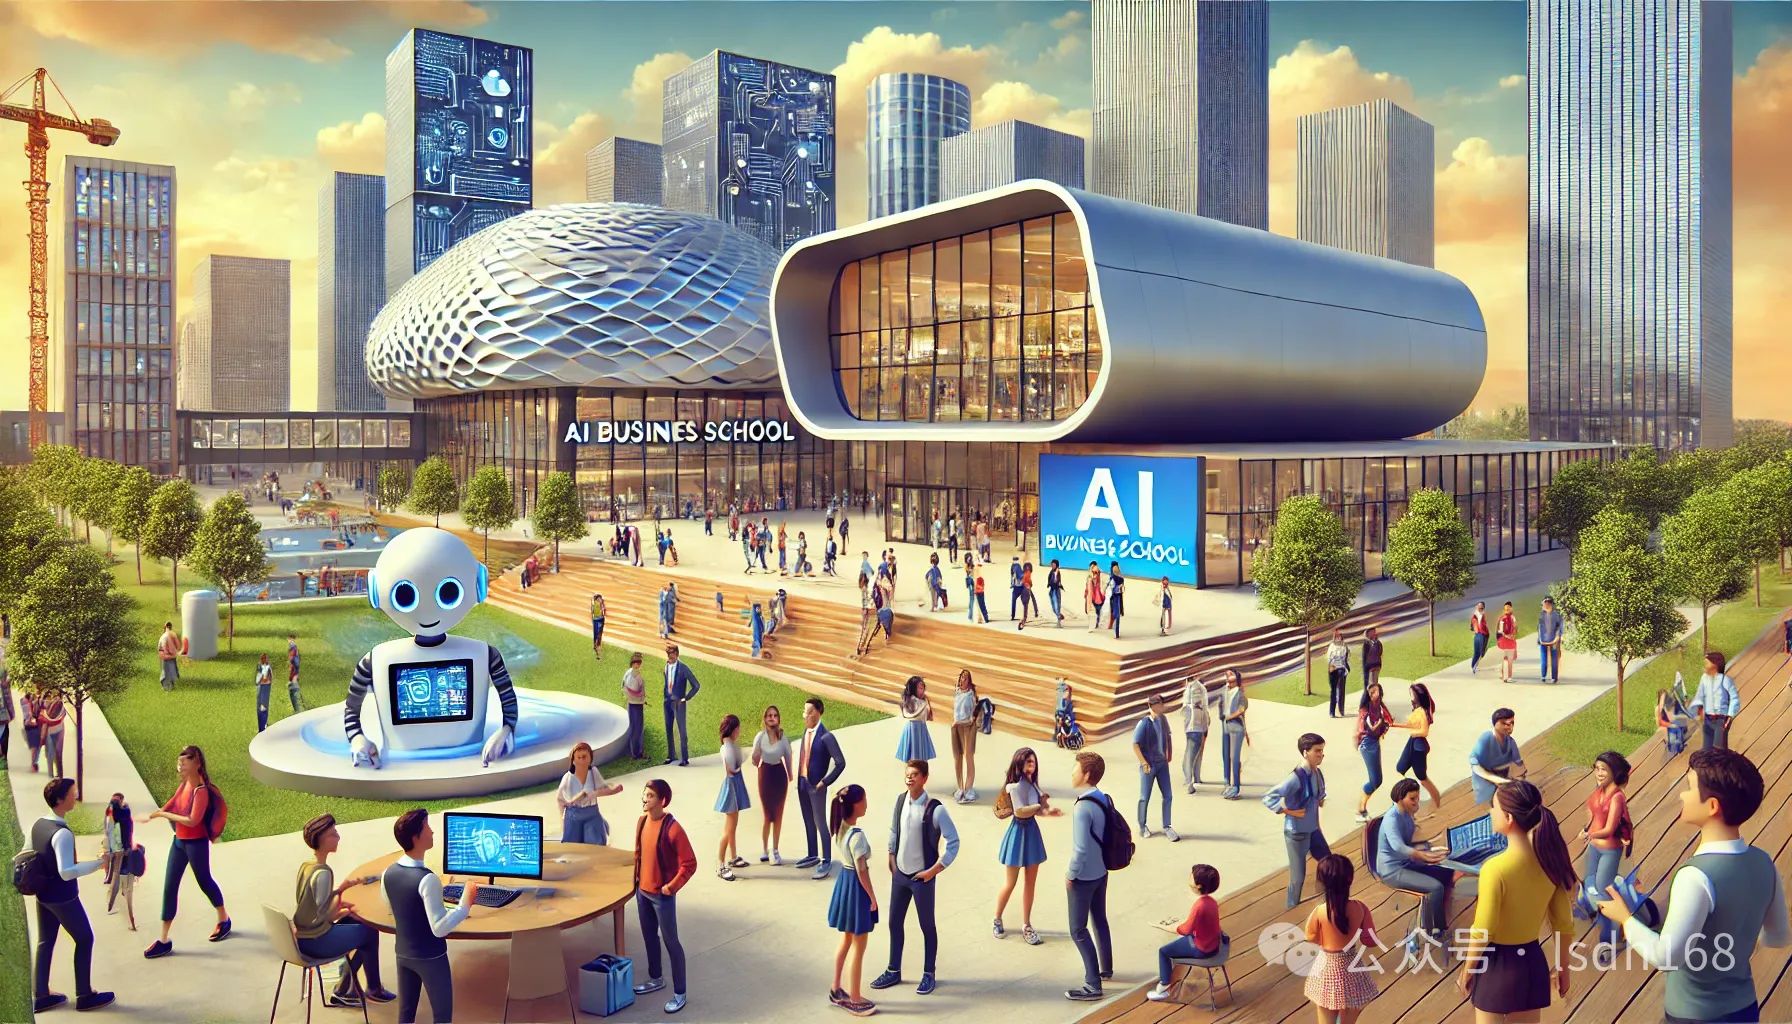 A modern campus of an AI Business School with a futuristic building and a diverse group of students and teachers interacting happily in the foreground. The scene is depicted in a 3D Pixar style, capturing a vibrant and engaging learning environment.